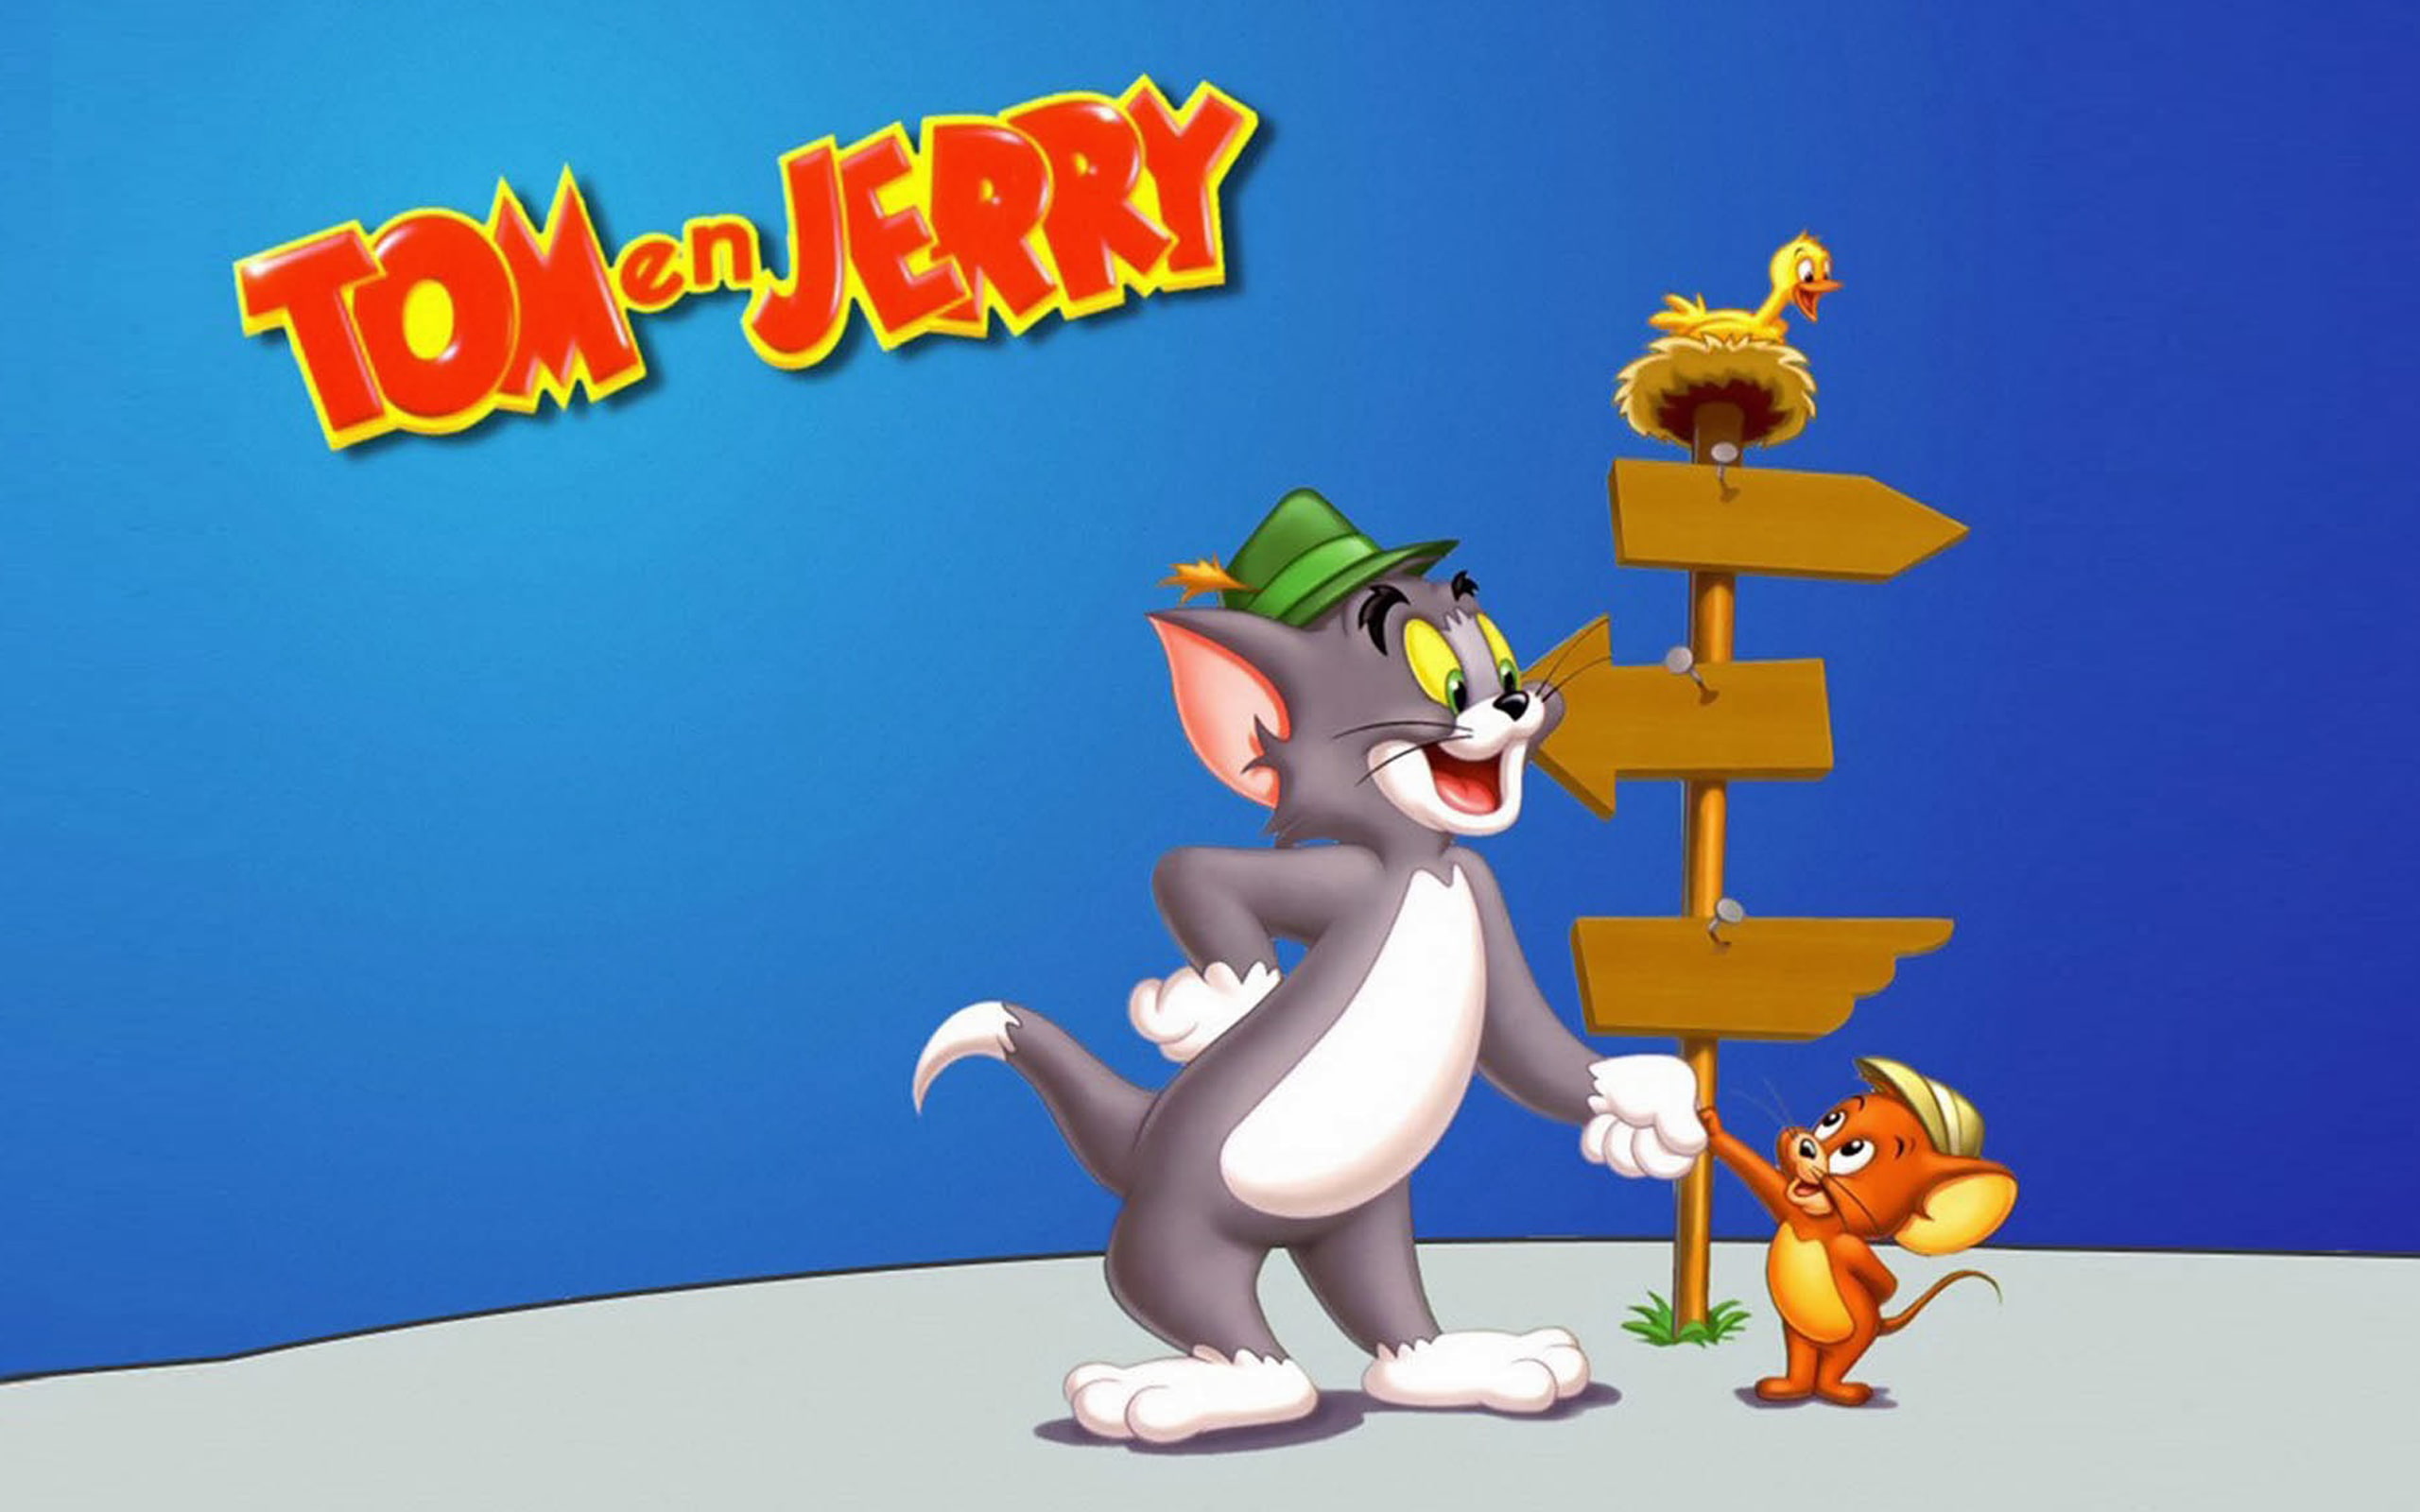 Tom And Jerry The Popular Cartoon Characters Hd Wallpaper For Desktop 2560×1600